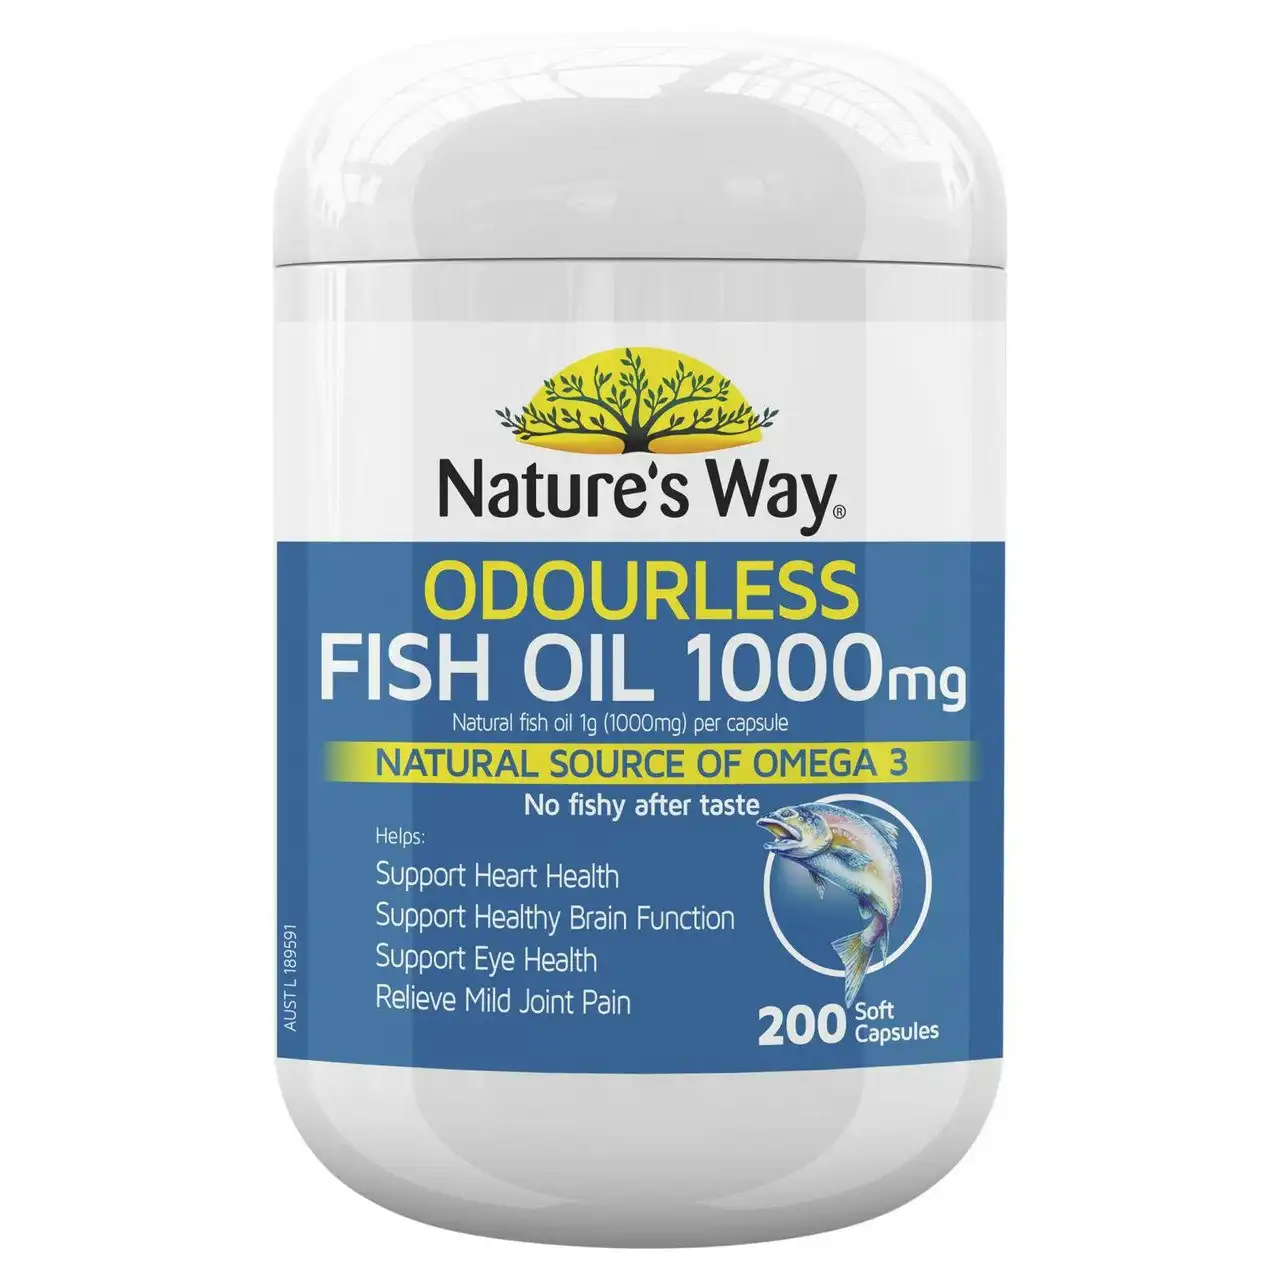 Nature's Way Odourless Fish Oil 1000mg 200 Capsules